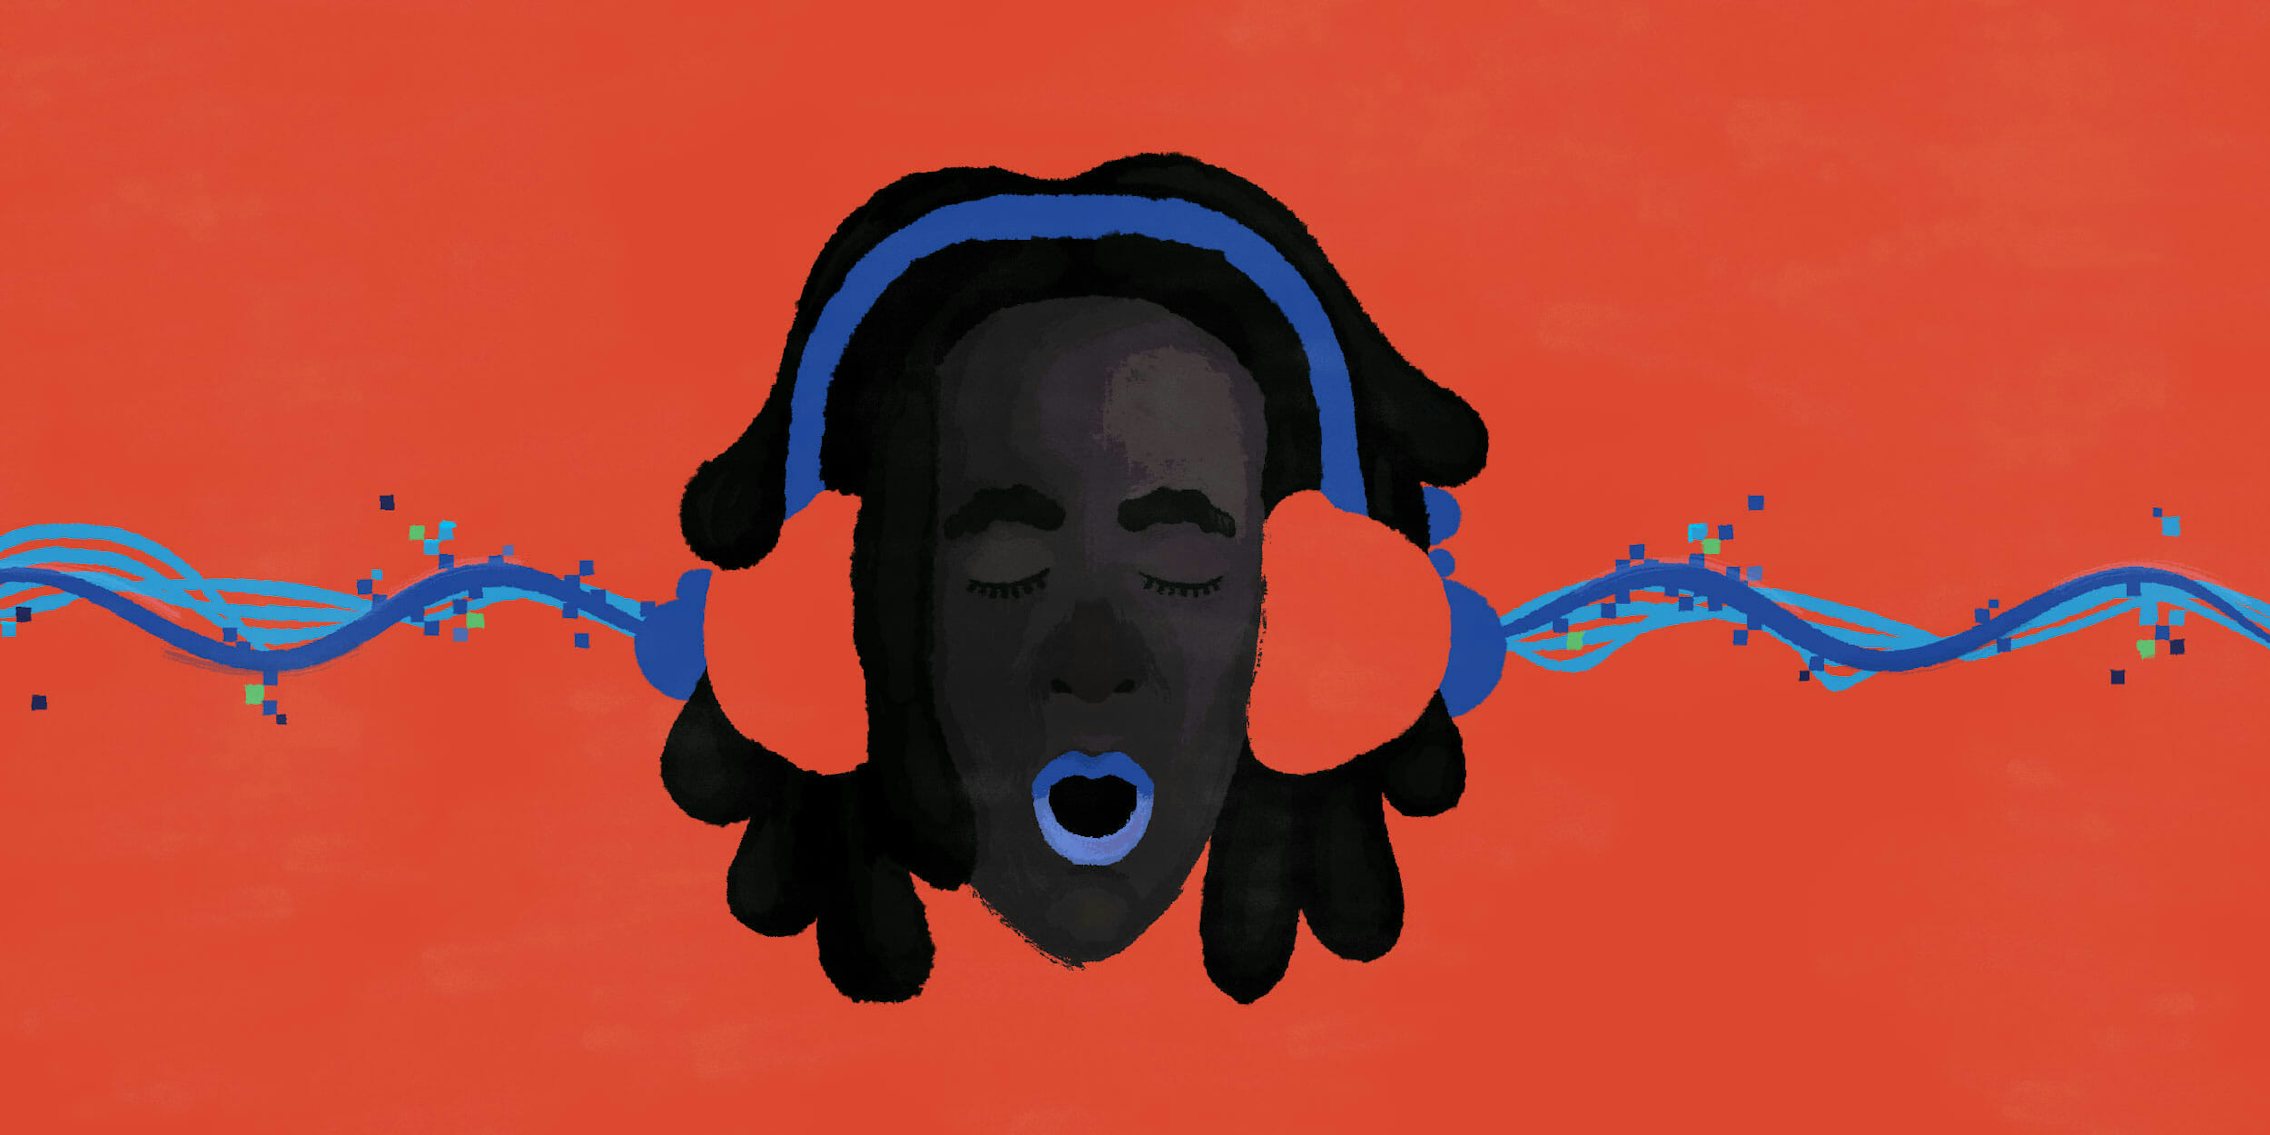 Illustration of a person wearing headphones and listening to music.